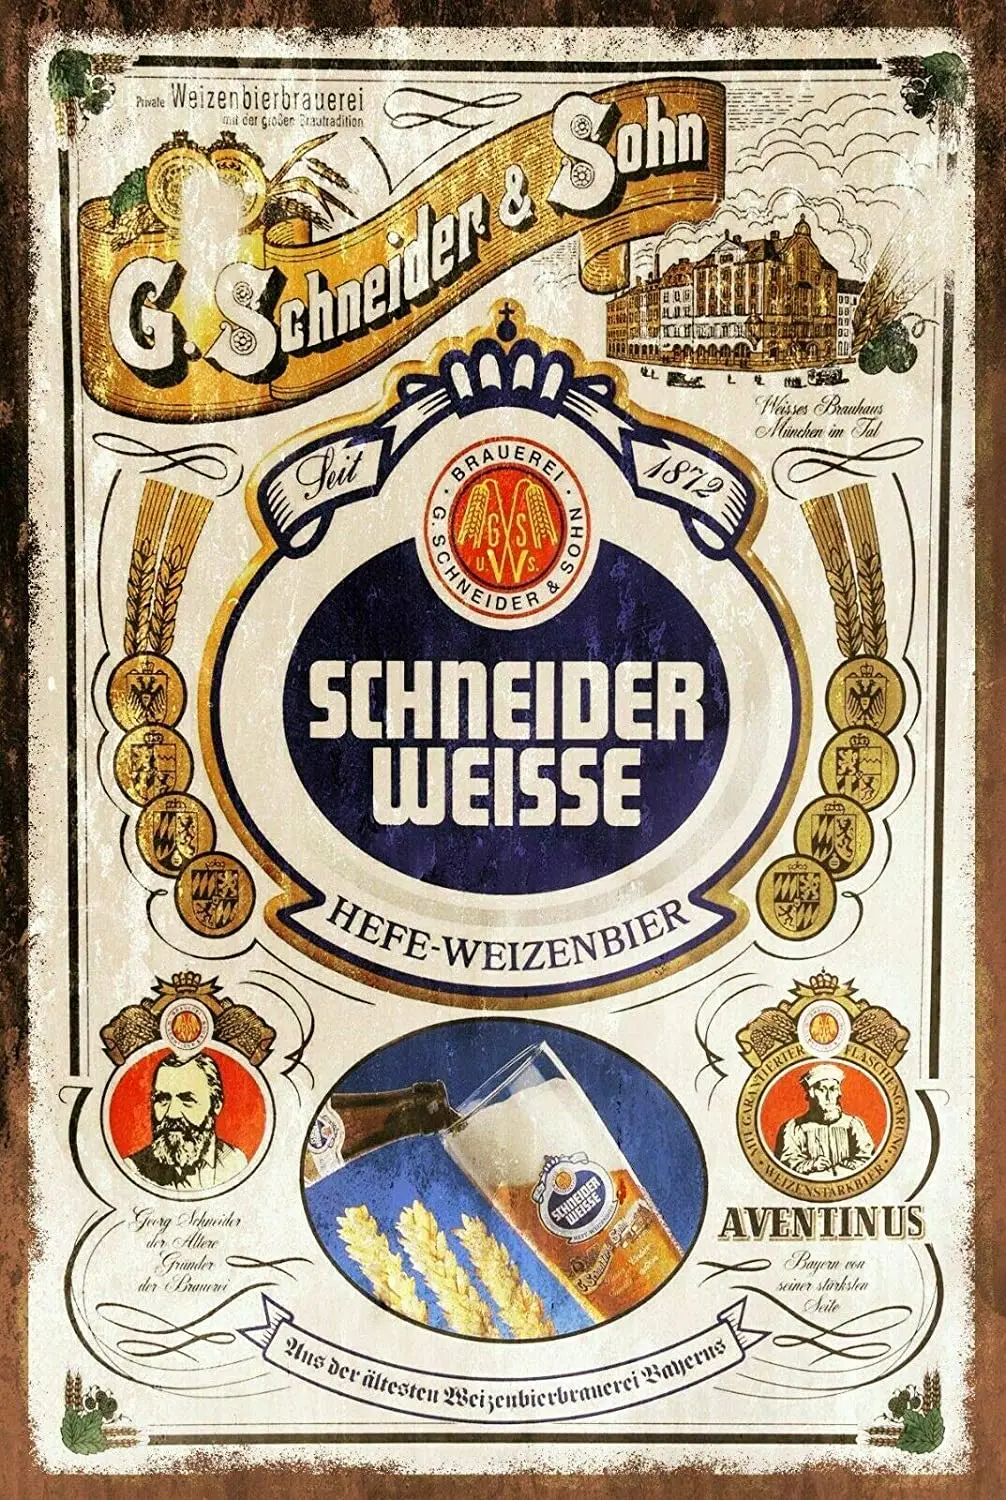 

Schneider Weisse Beer Brewery Theme Metal Tin Sign Advert Retro 8x12 Inch Decor Sign Kitchen Dining Room Bedroom Living Room